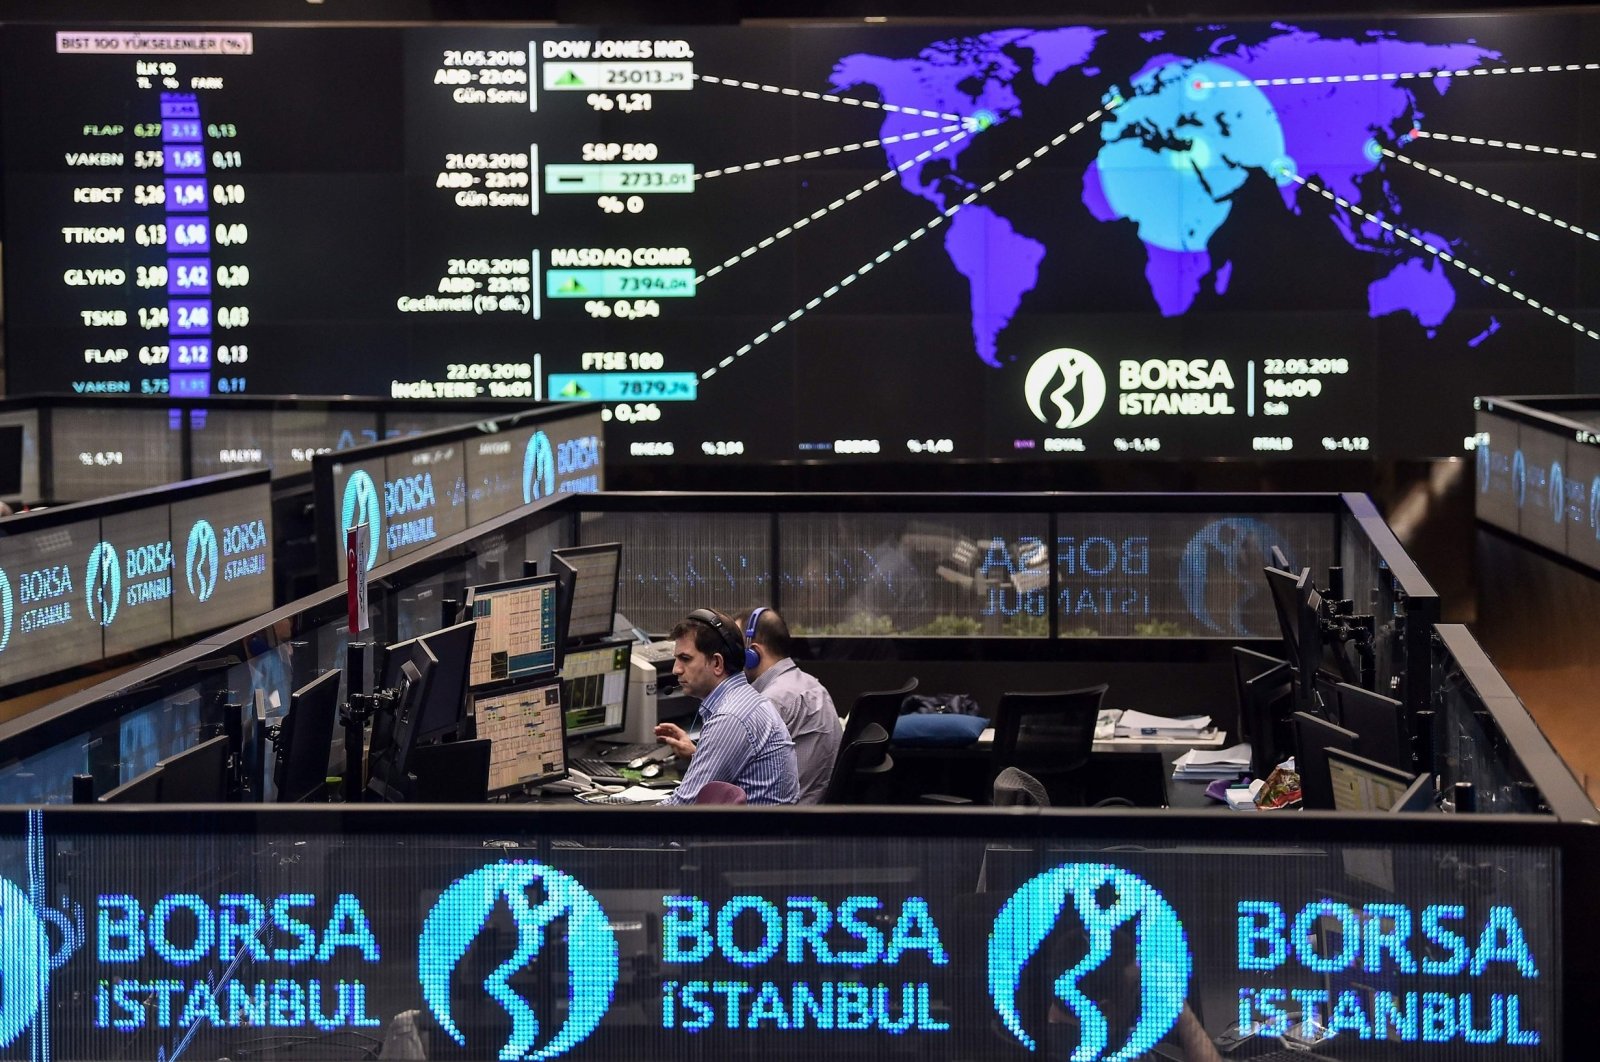 Traders work at their desks on the floor of the Borsa Istanbul, Istanbul, Türkiye, May 22, 2018. (AFP Photo)